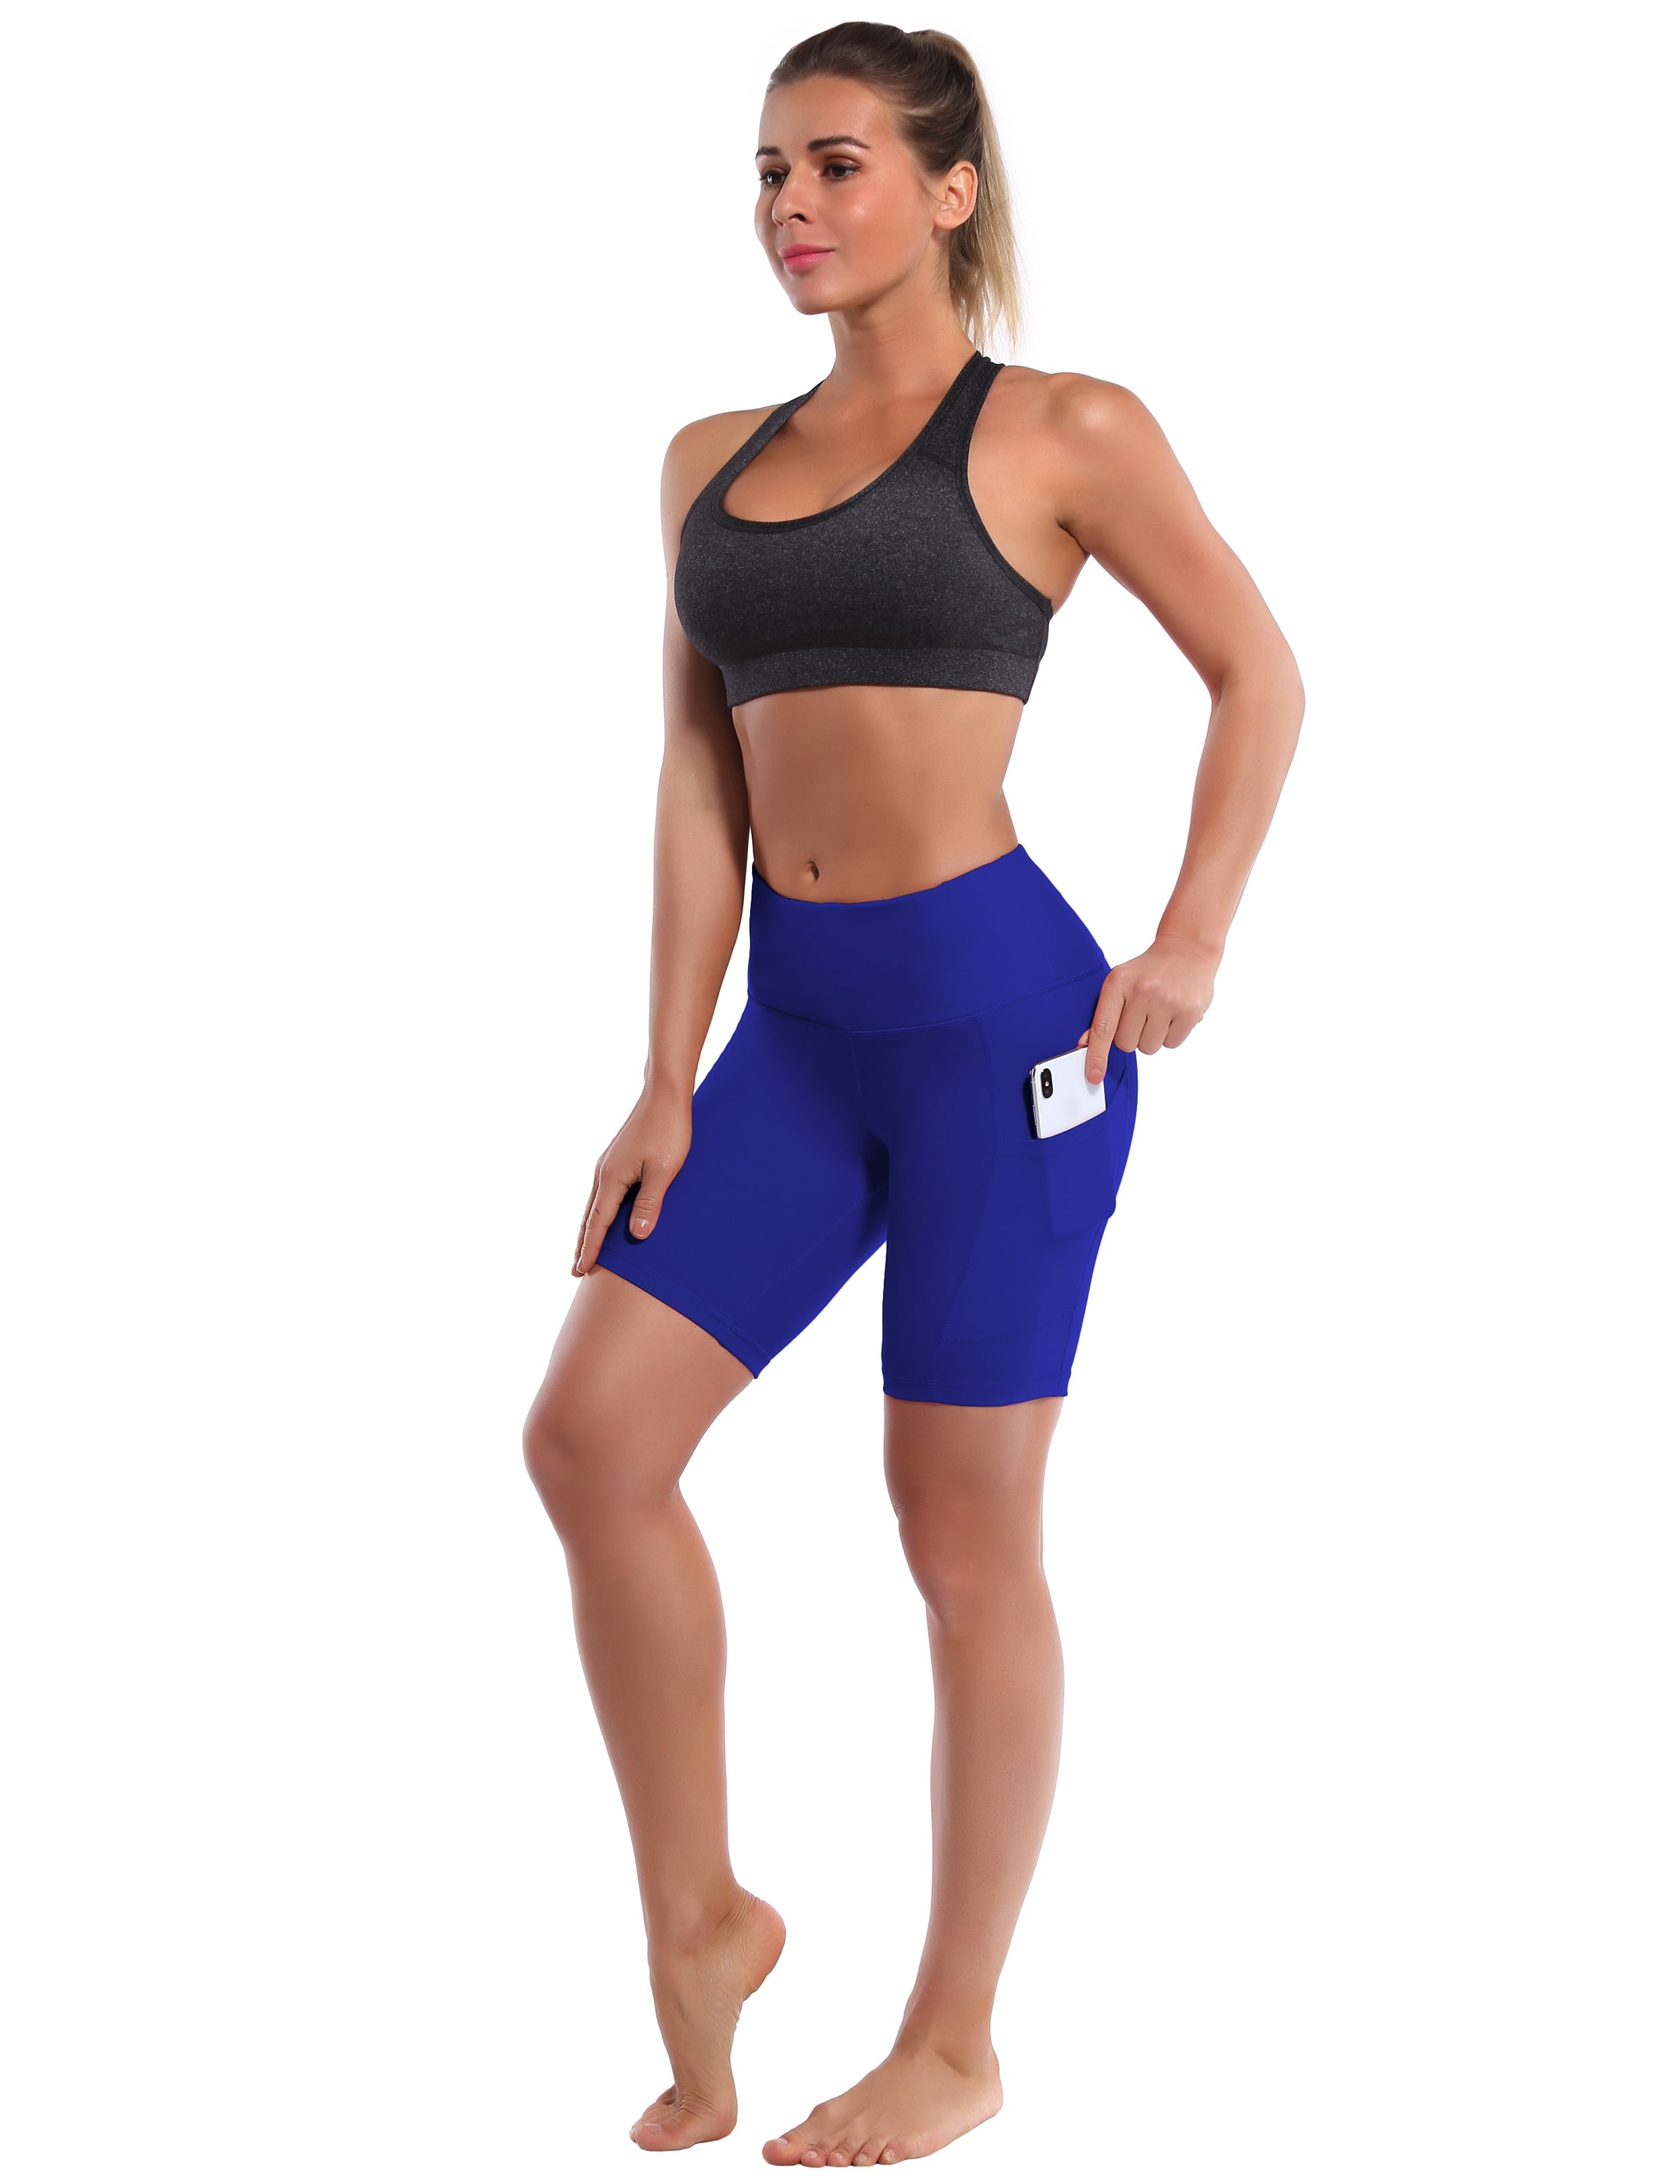 8" Side Pockets Pilates Shorts navy Sleek, soft, smooth and totally comfortable: our newest style is here. Softest-ever fabric High elasticity High density 4-way stretch Fabric doesn't attract lint easily No see-through Moisture-wicking Machine wash 75% Nylon, 25% Spandex